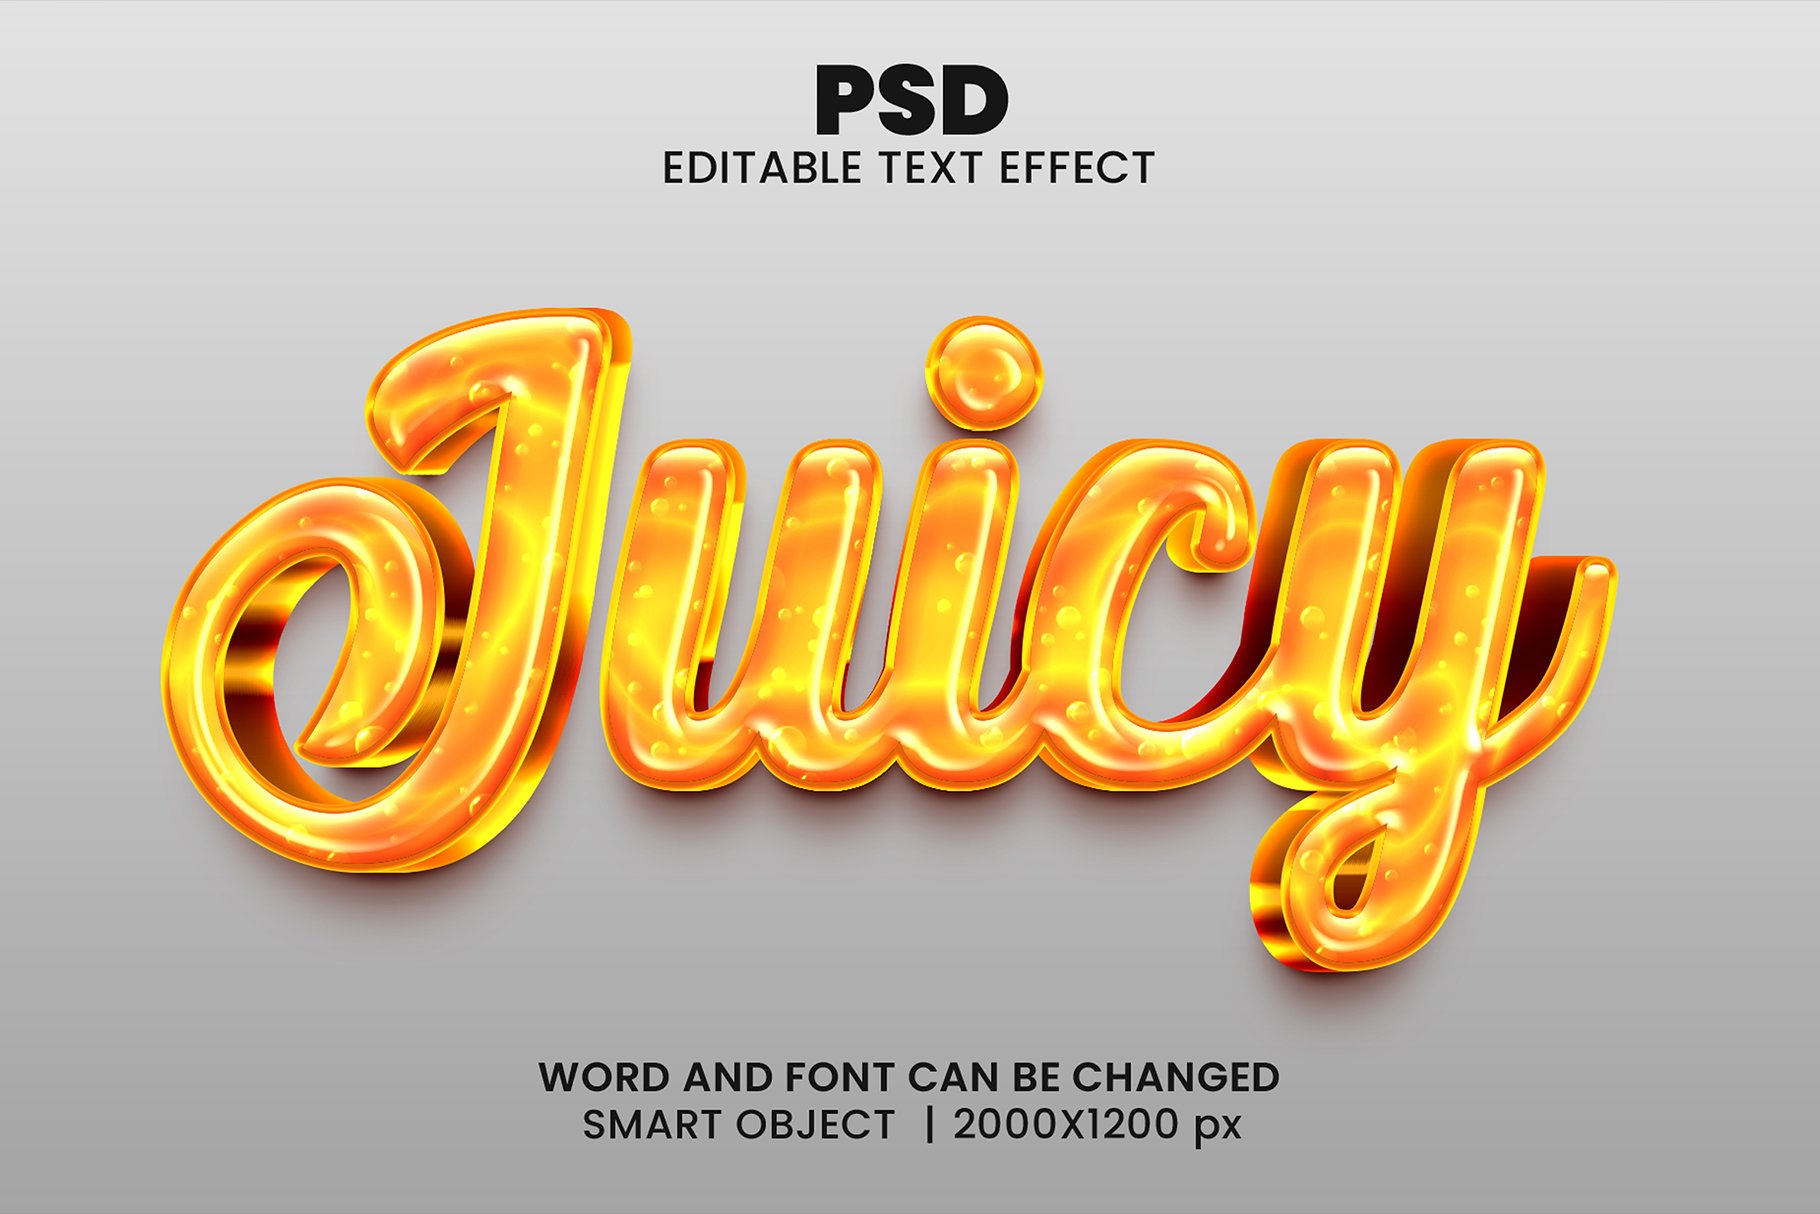 Juicy glossy Psd Text Effectcover image.